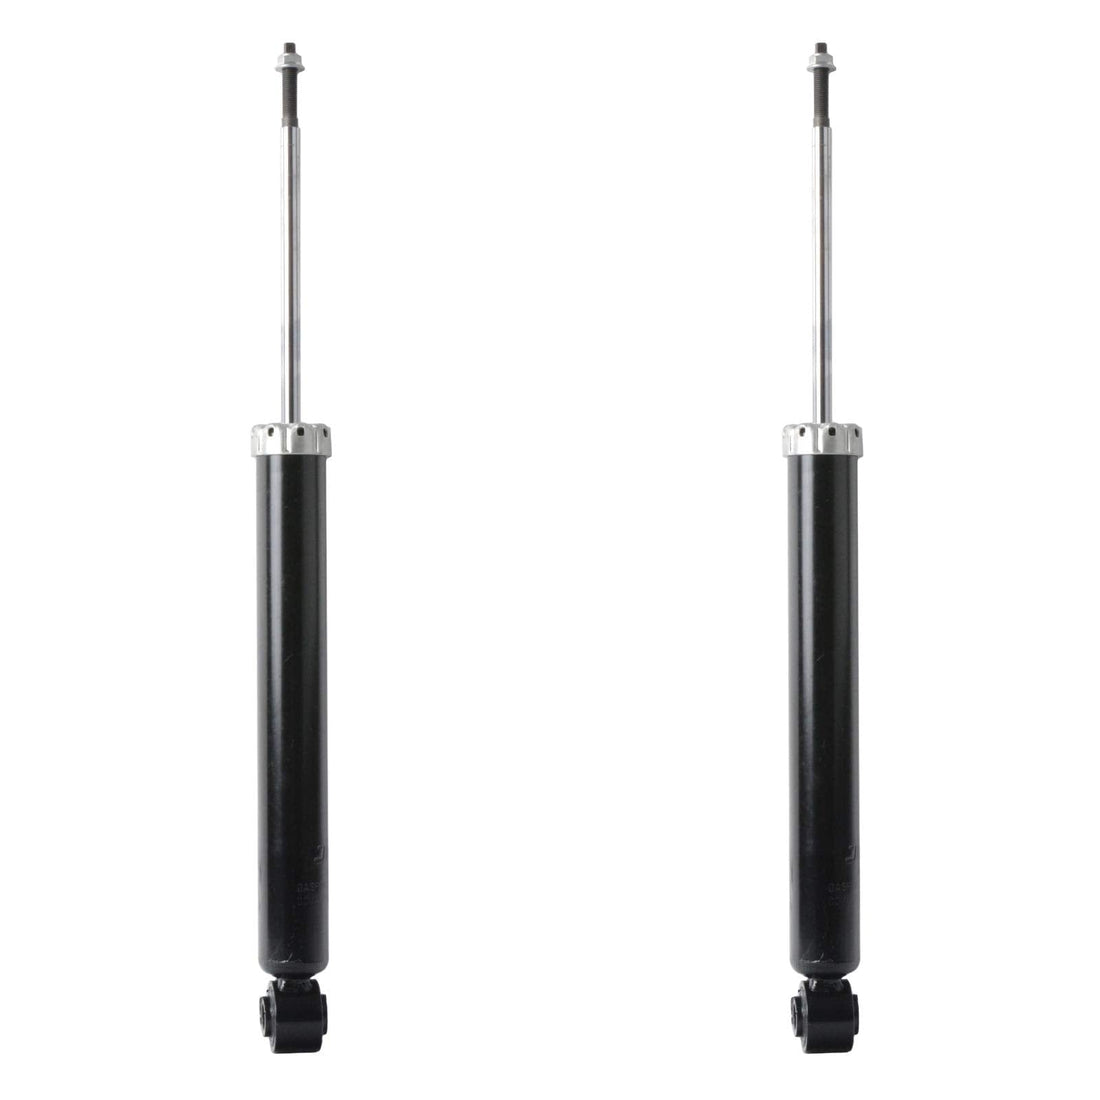 2007-2009 Amanti/06-08 Sonata Rear Shock Absorbers Complete Pair